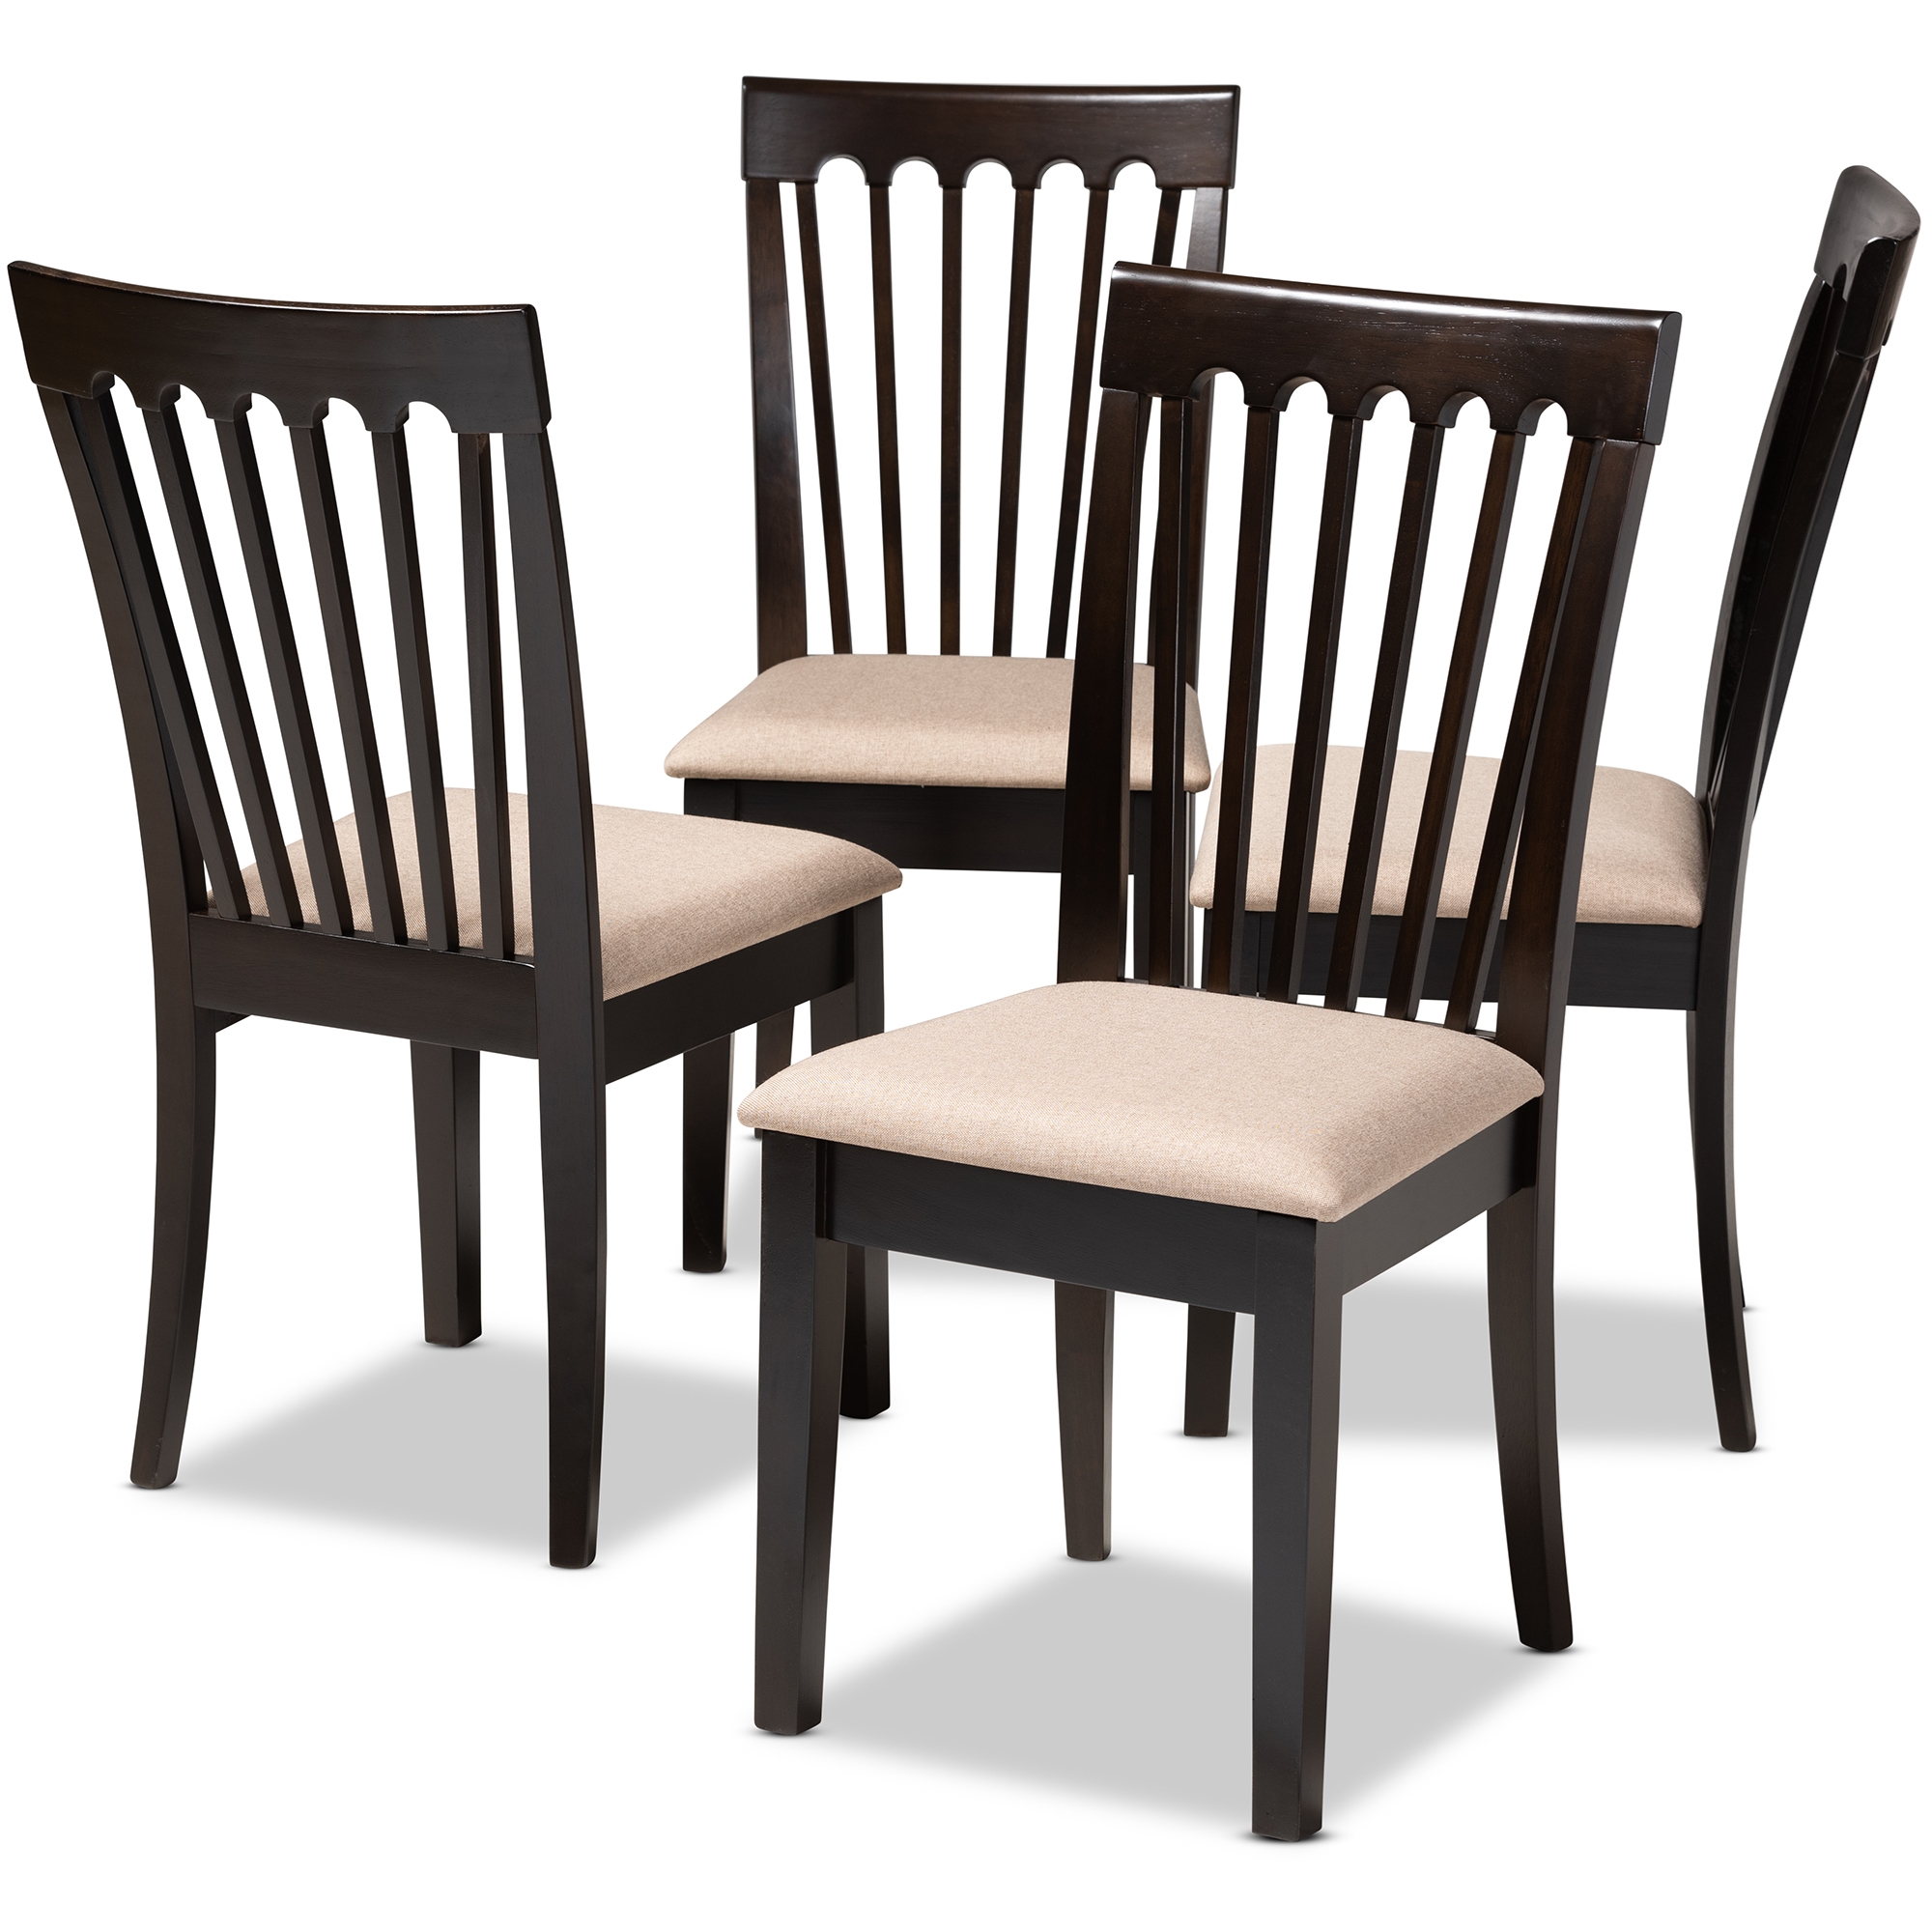 Baxton Studio Minette Modern And, Modern Wood Dining Chairs Set Of 4